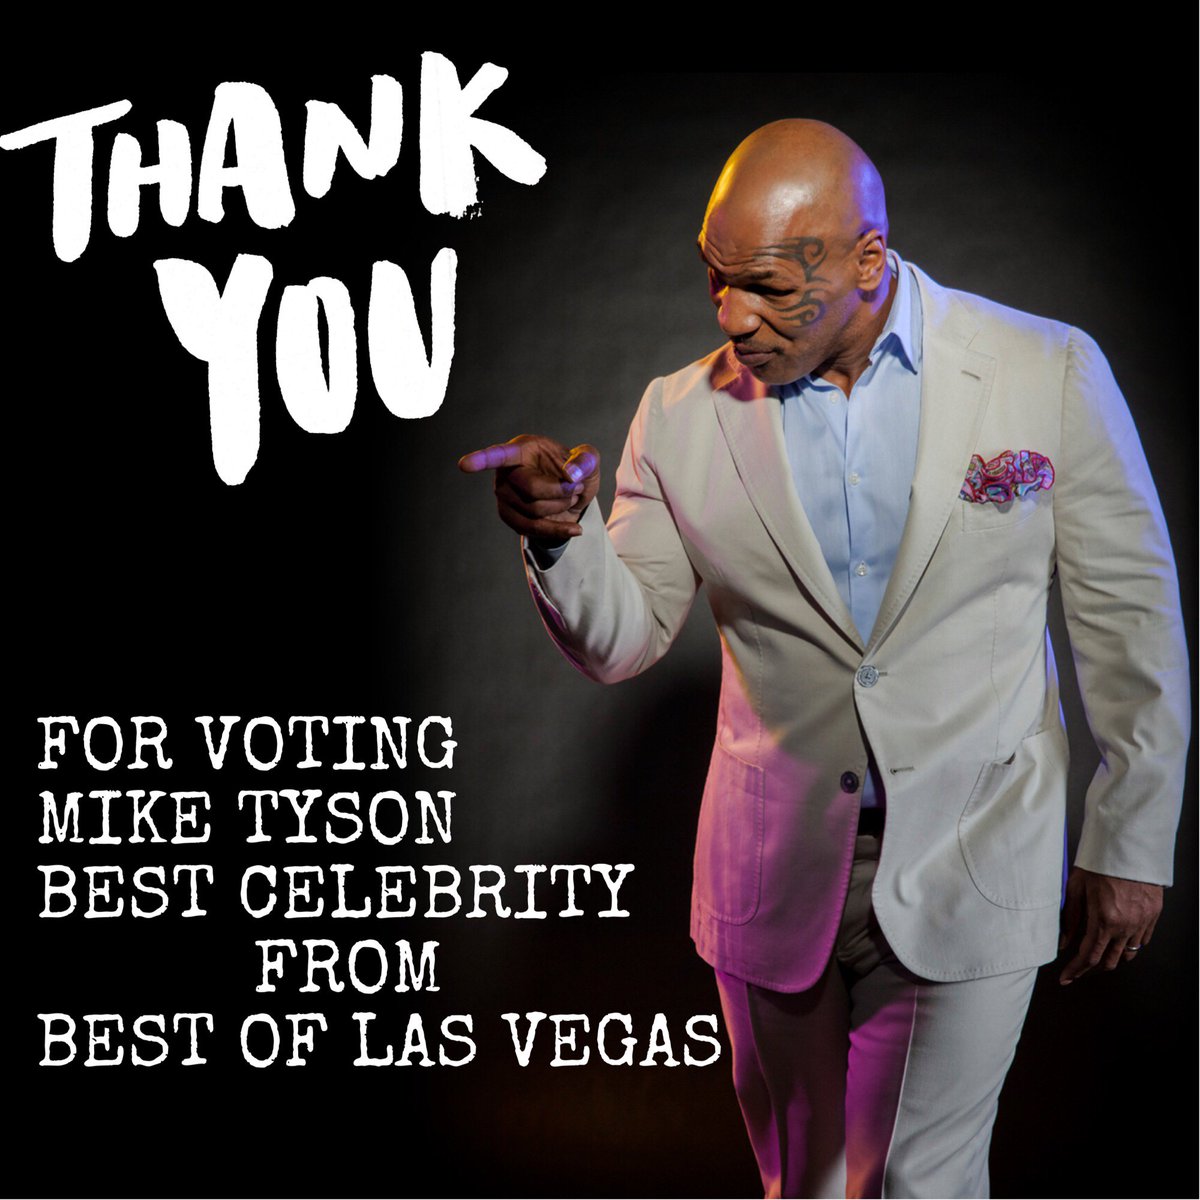 Thank you to everyone who voted for #MikeTyson in @TheBestOfLV... He won the Best Celebrity award! https://t.co/pXRRbLMZ4f